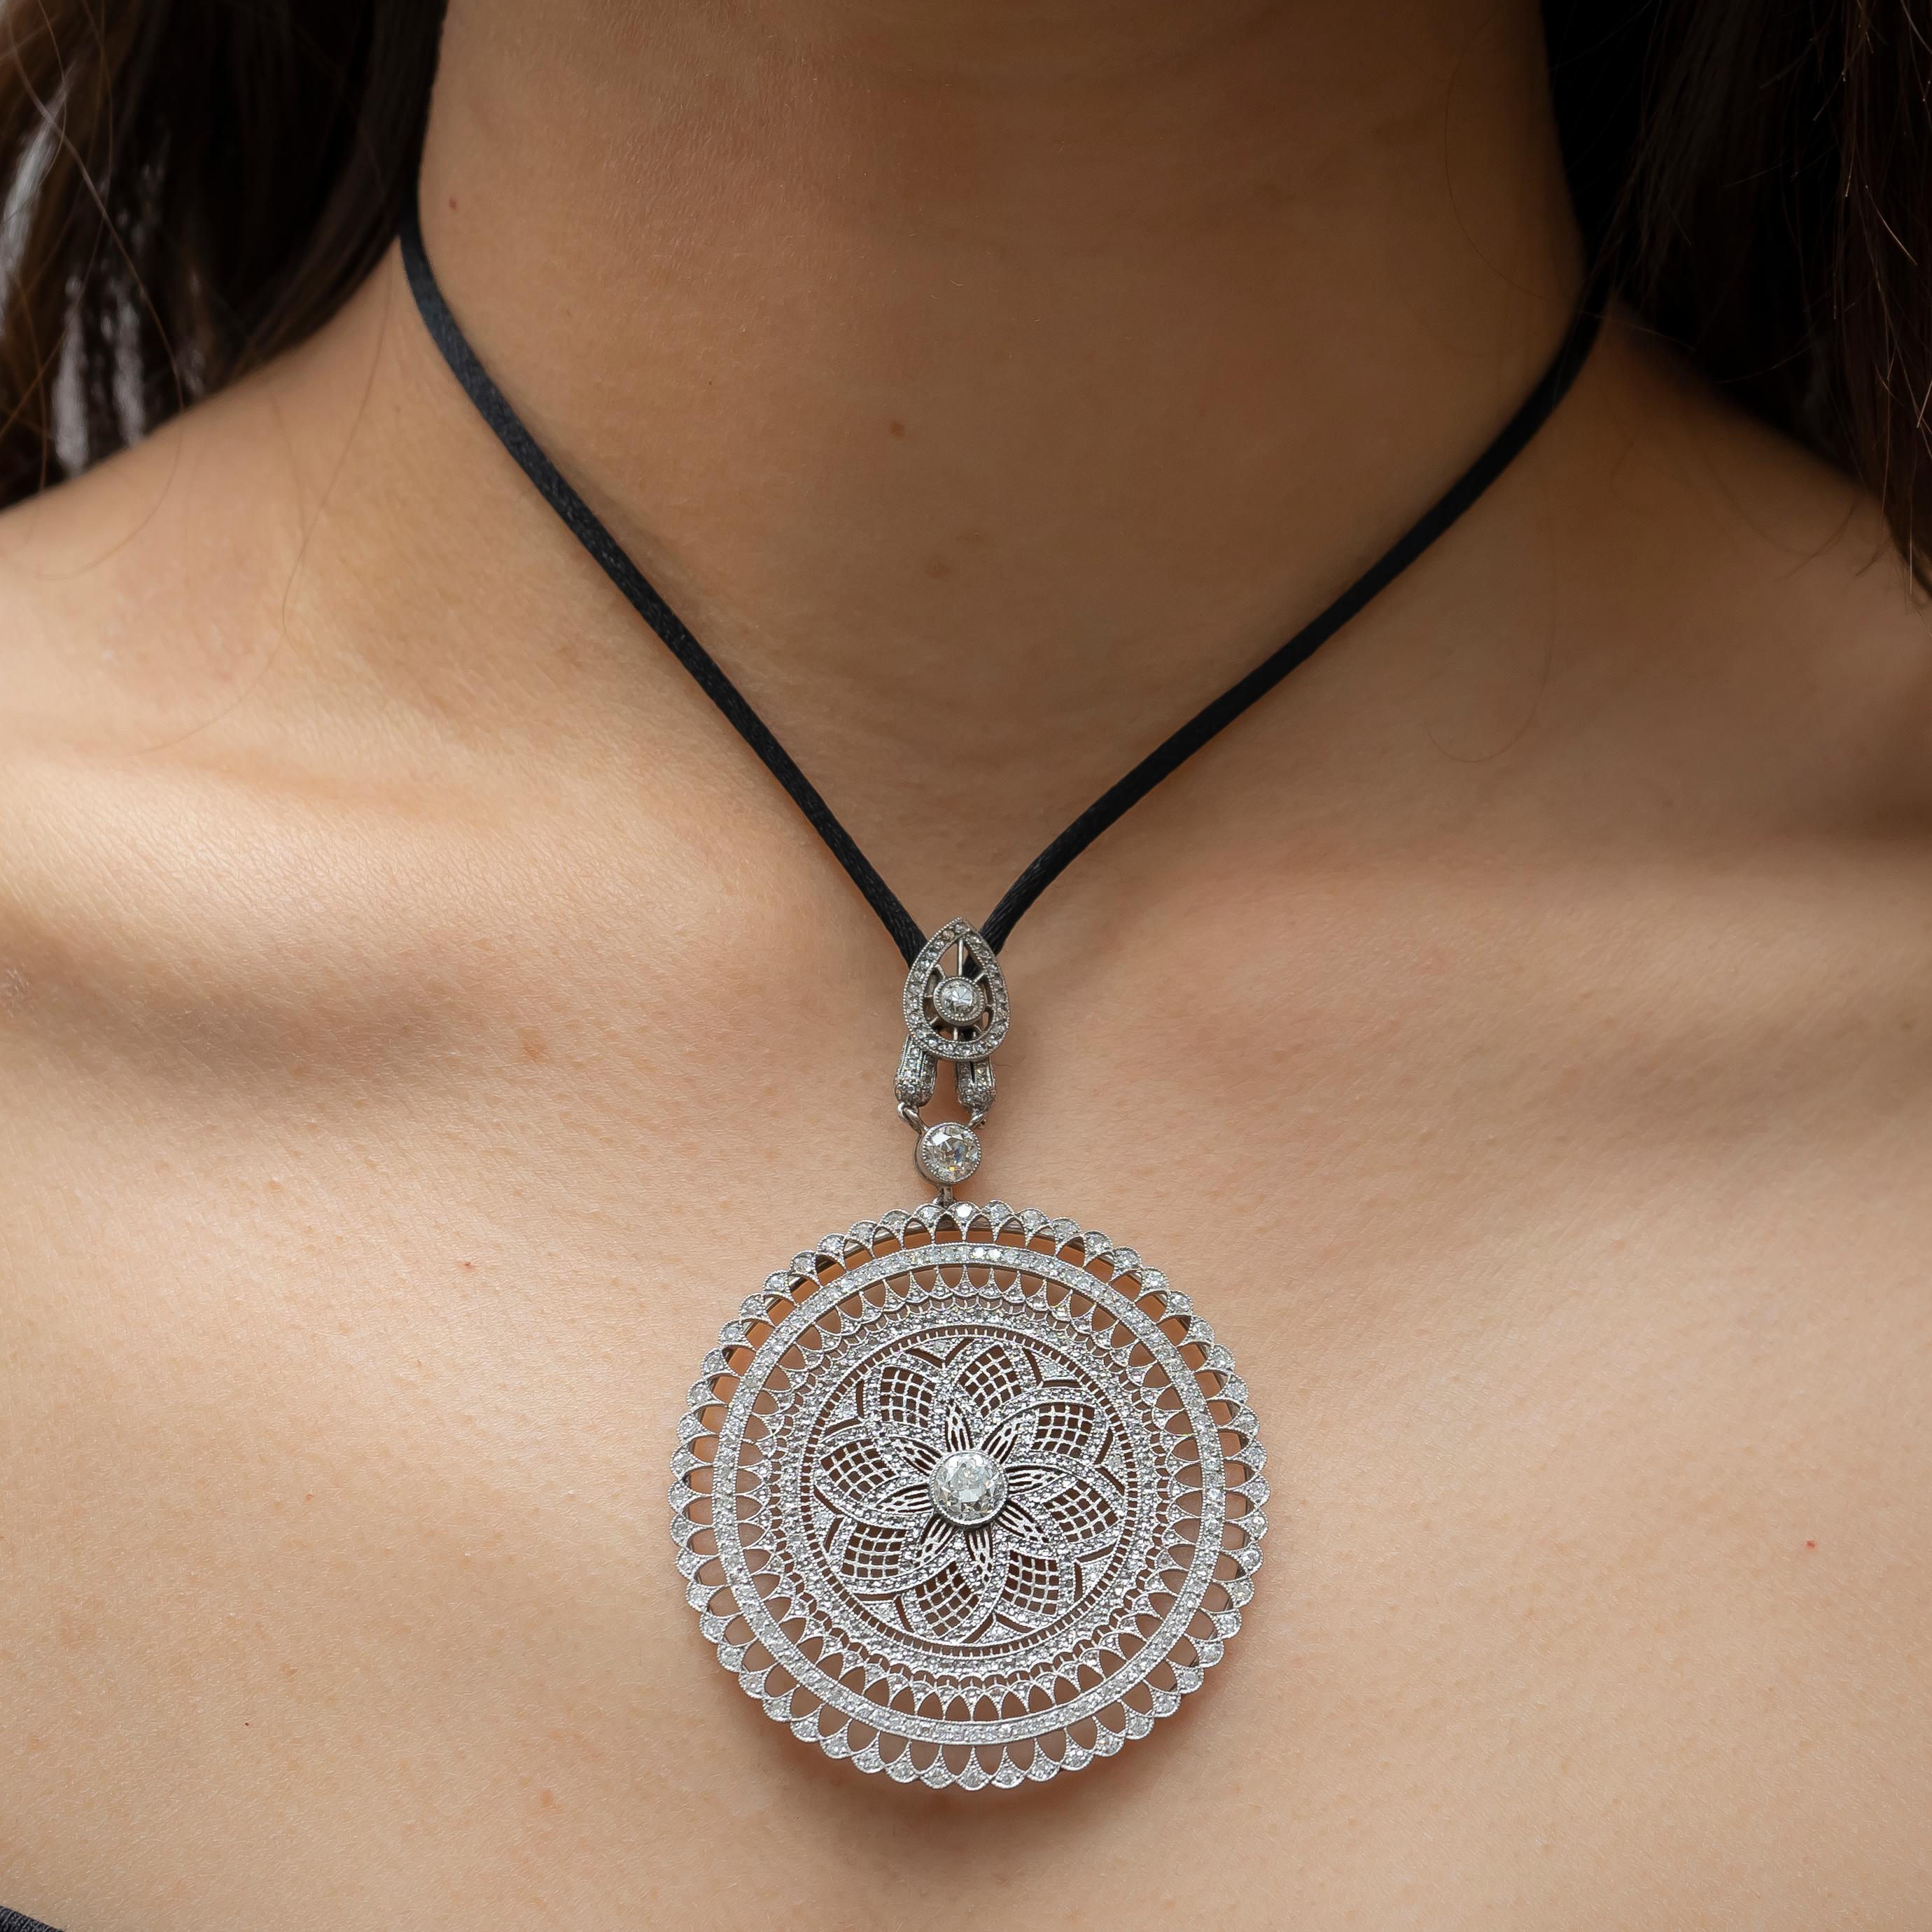 A modern, Edwardian style mandala diamond pendant, set with a central old-cut diamond, weighing 1.08ct, surrounded by 3.21ct of rose-cut and old-cut diamonds, on a lace like background, mounted in platinum, with millegrain edges on a black cord,